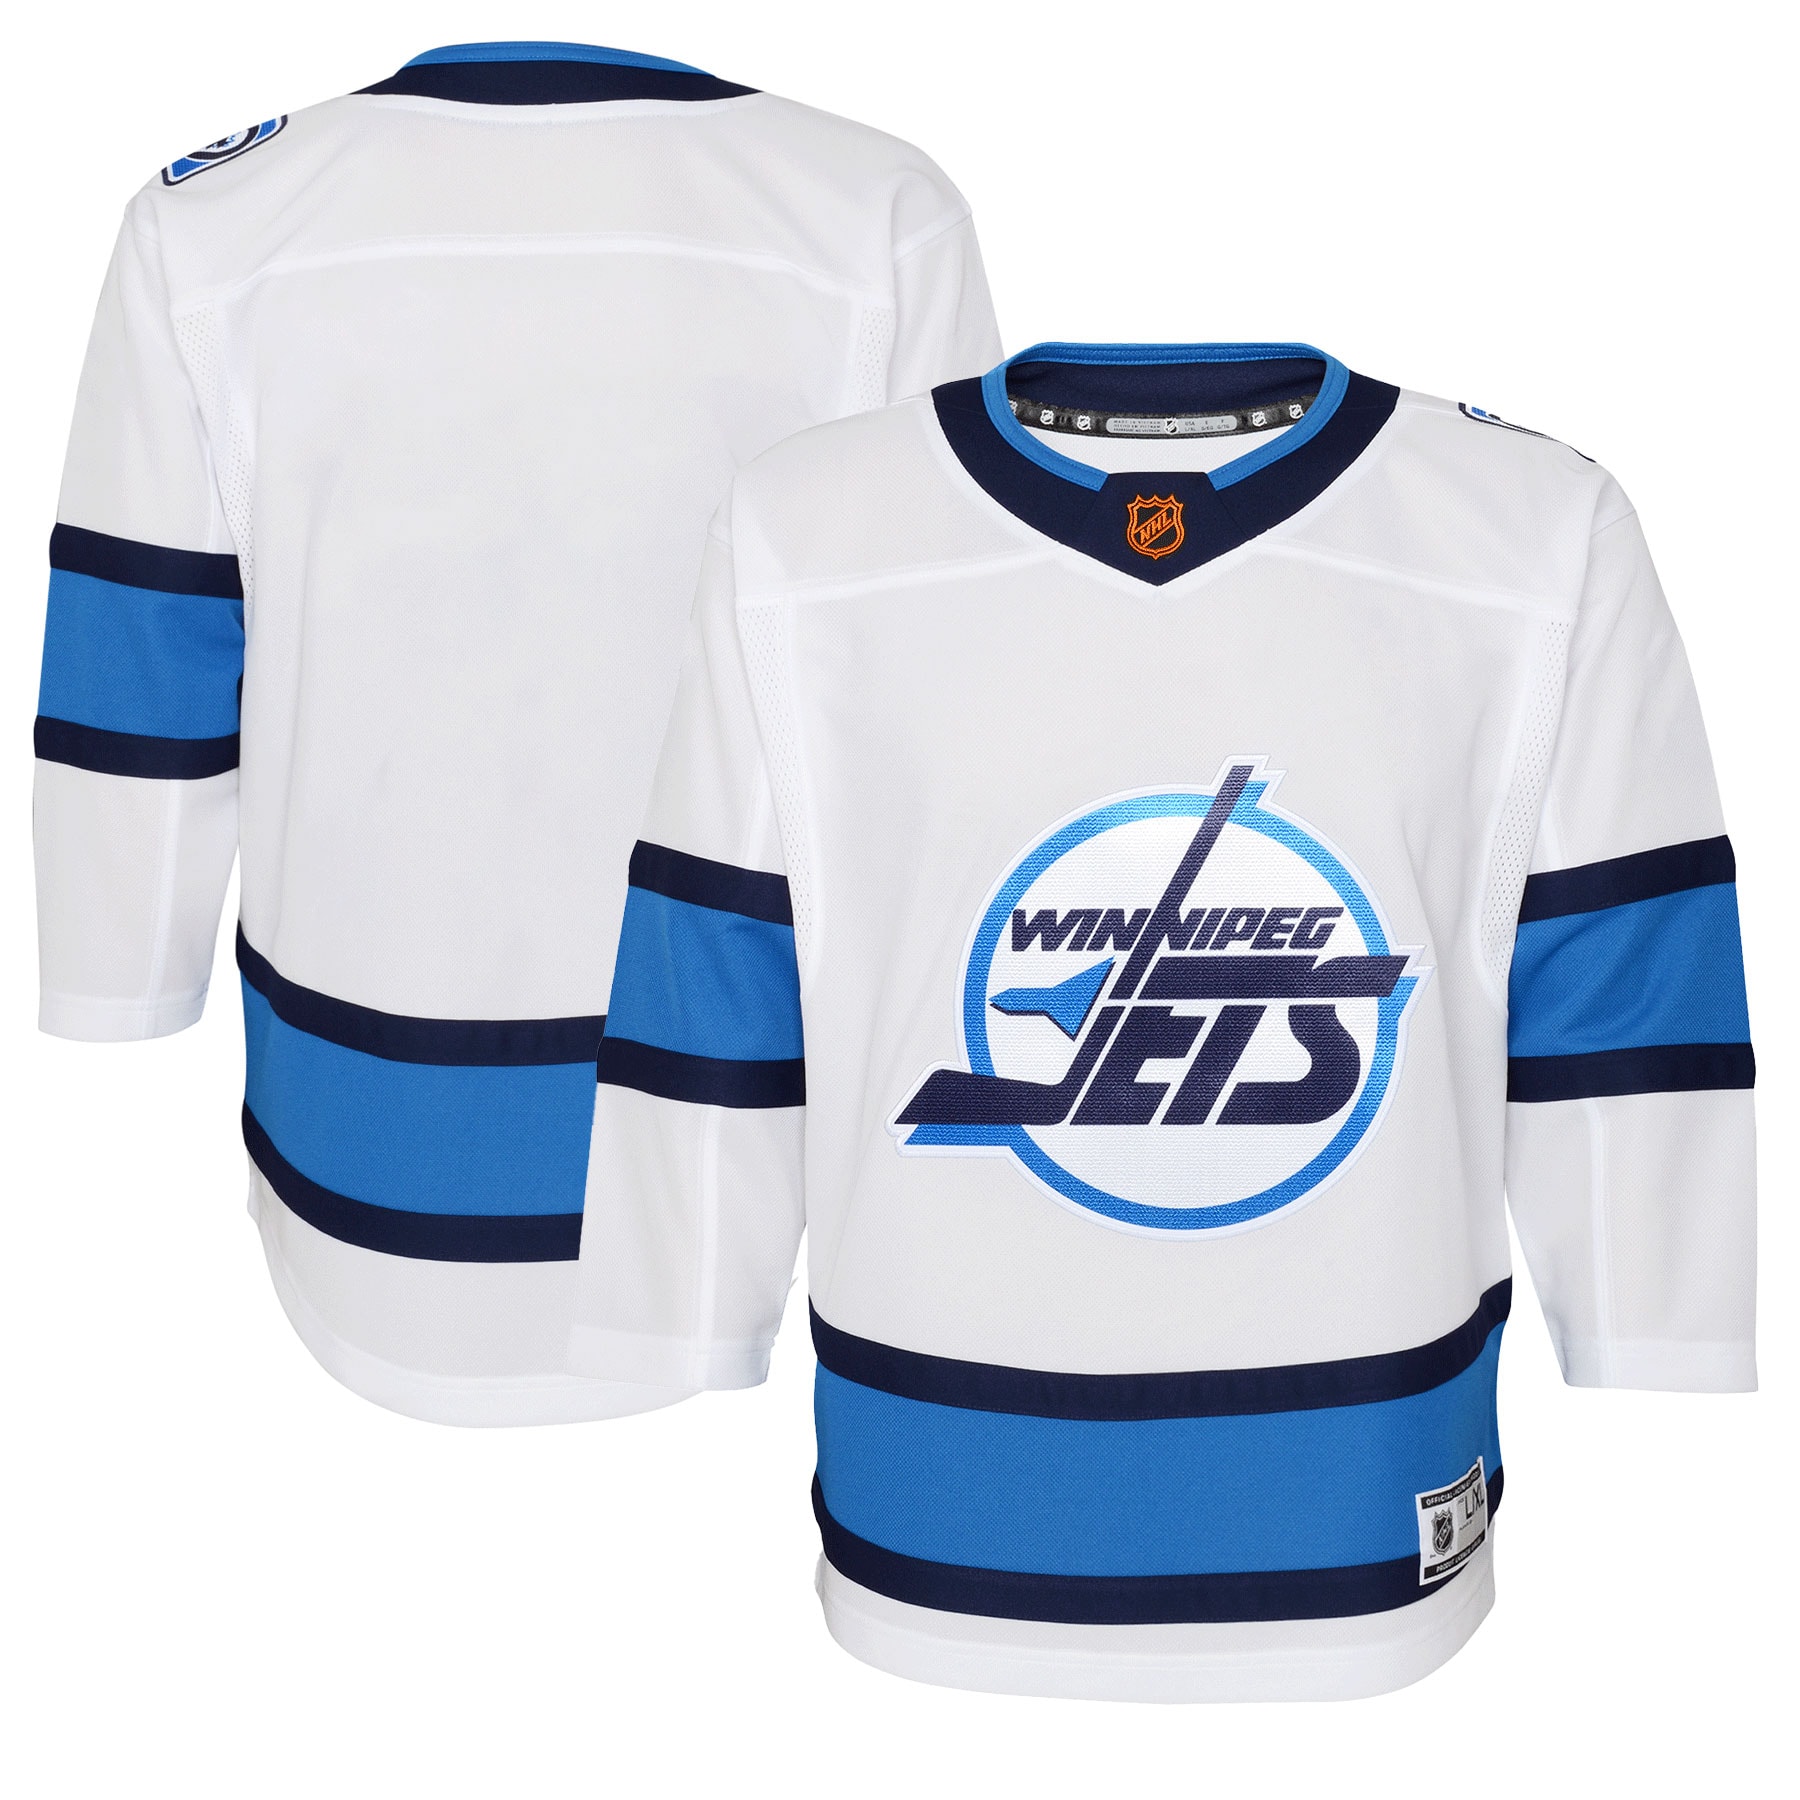 Youth Winnipeg Jets White Special Edition 2.0 Premier Blank Jersey